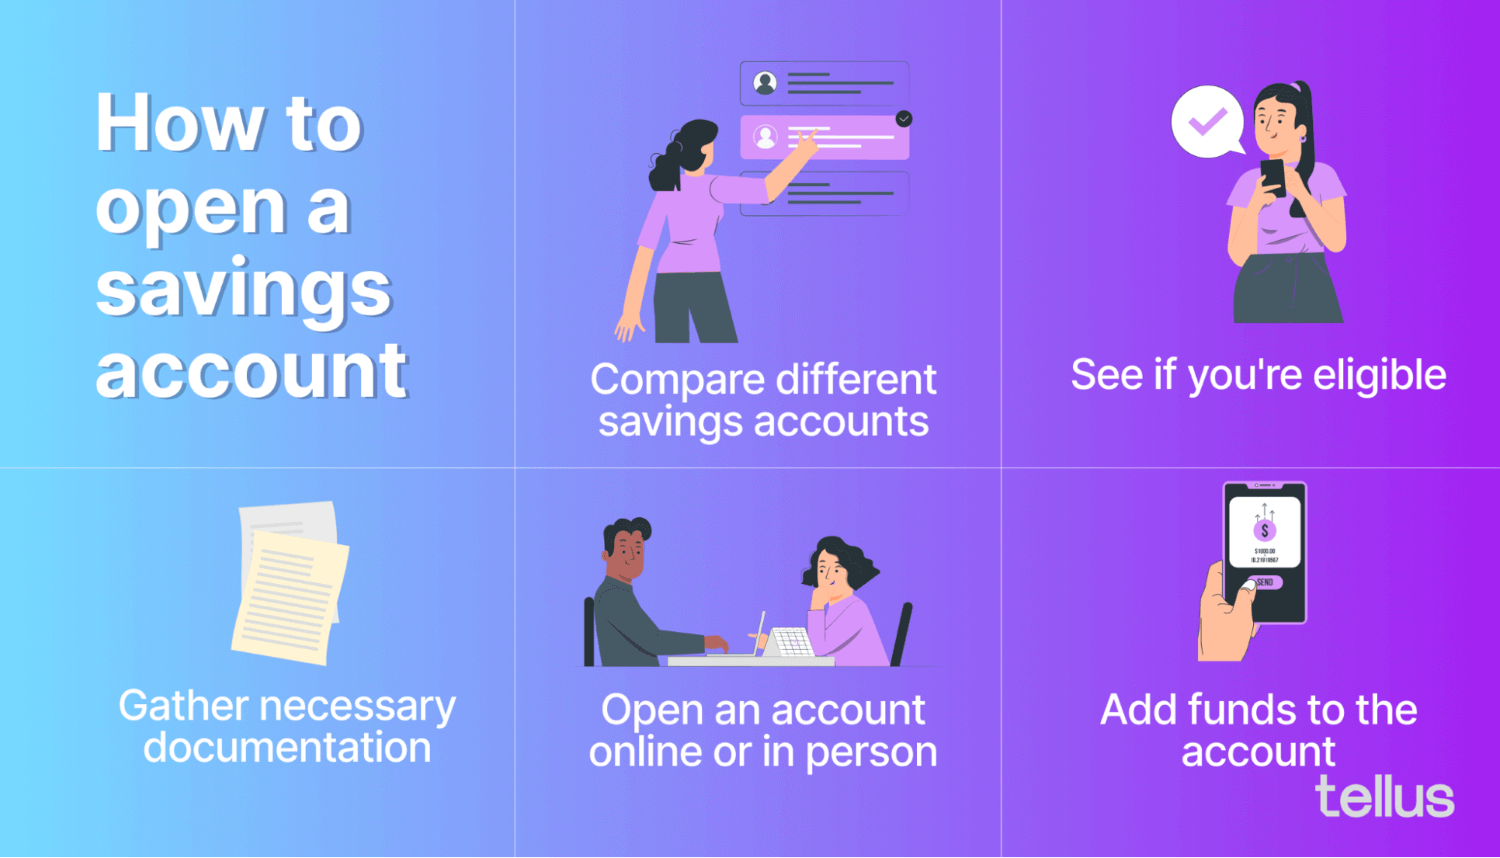 A step by step guide on how to open a savings account